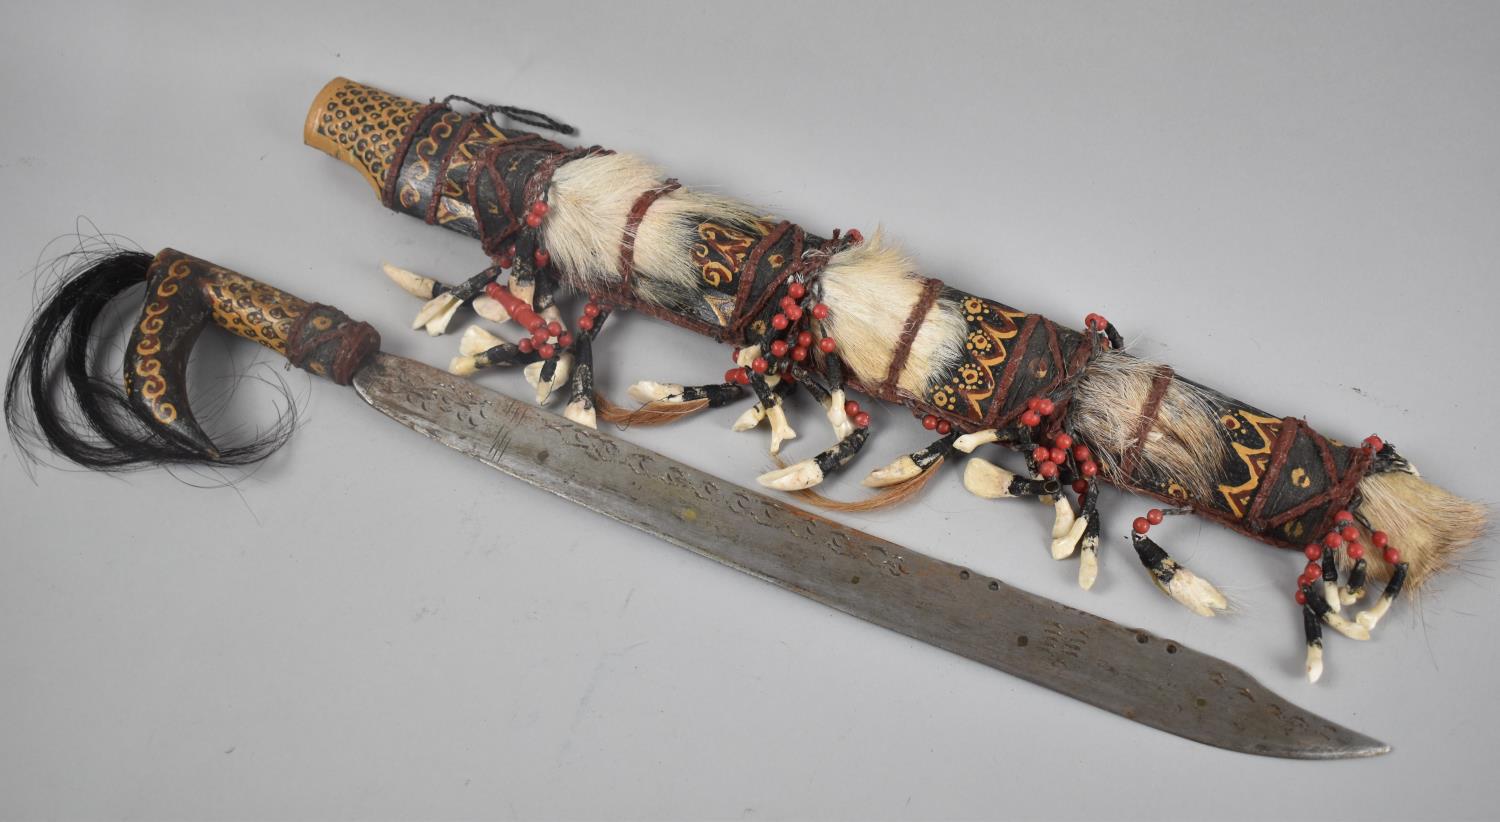 A Souvenir African Tribal Sword Decorated with Seashells, Animal Skin and Beads, Missing Dagger, - Image 2 of 3